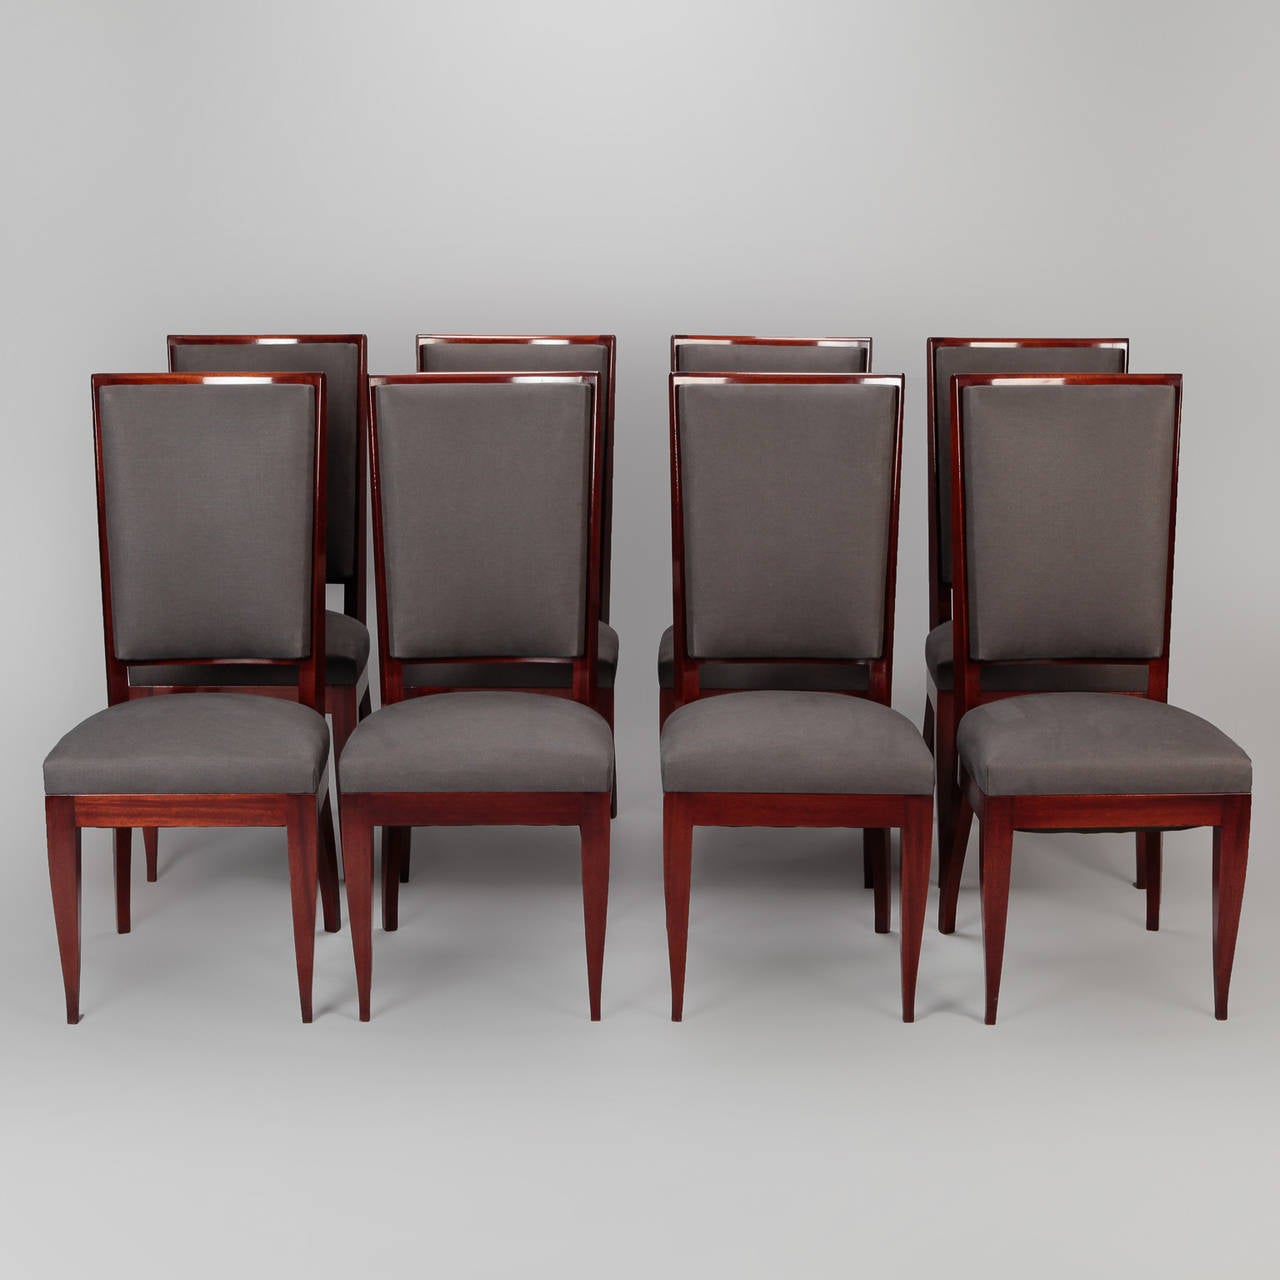 Circa 1930s set of eight tall back, armless French Art Deco dining chairs. Polished hardwood frames with graceful, tapered legs. Seats and backs newly upholstered in gray fabric. Seats are 18.5” high and 16.25” deep. Sold and priced as a set.